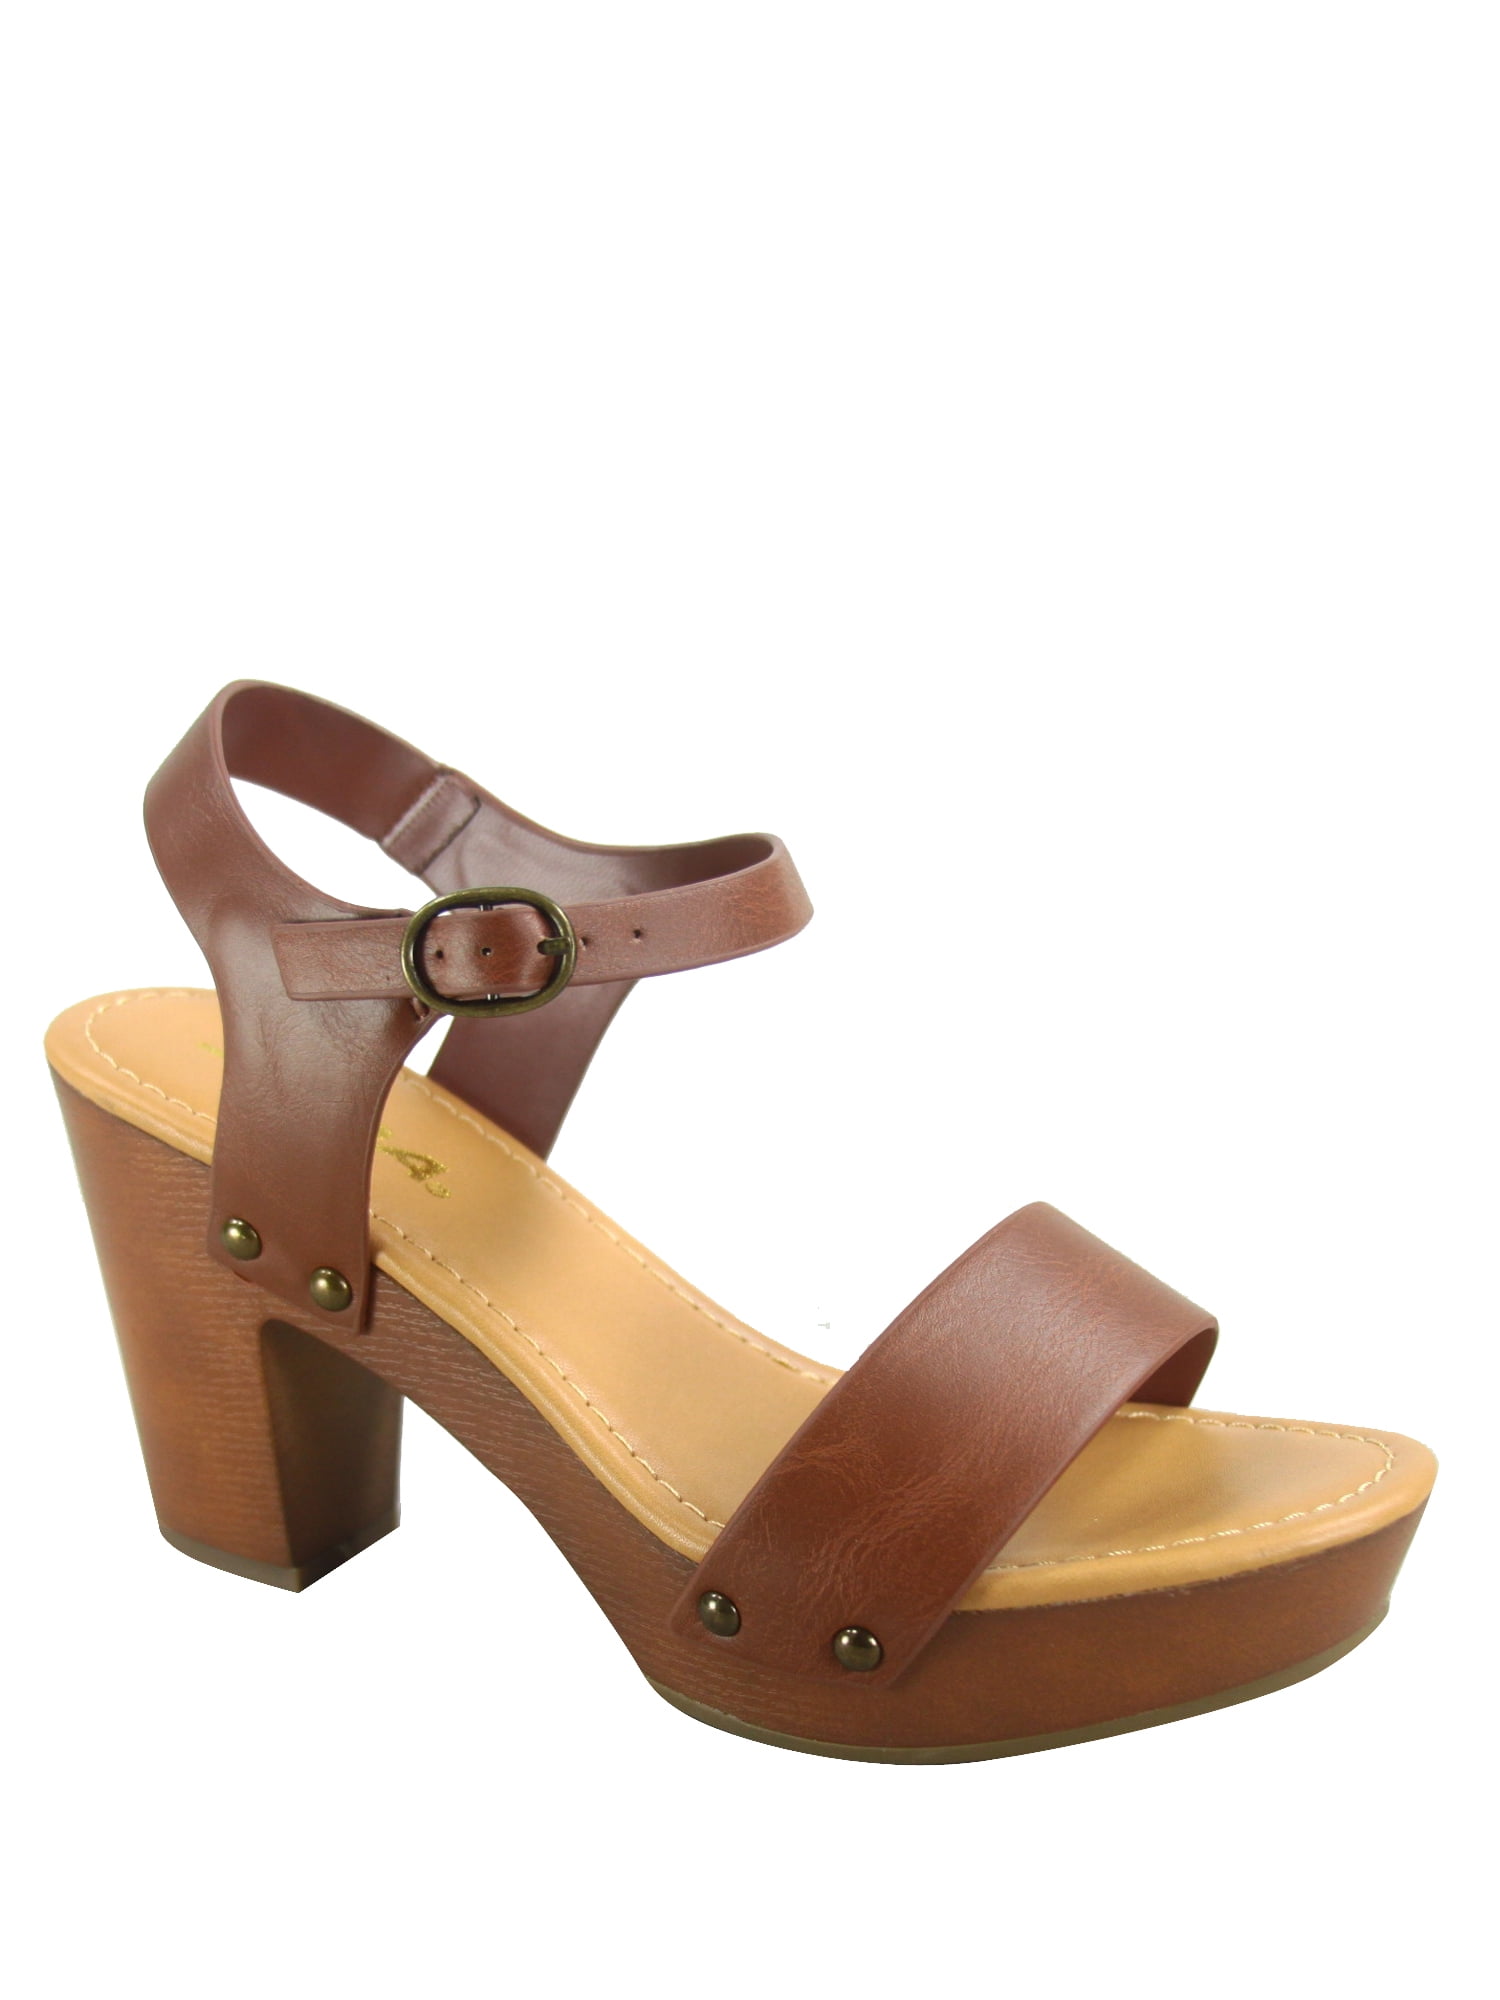 Wooden clogs  Brown color  F3   Medical Leather or Suede   Women 